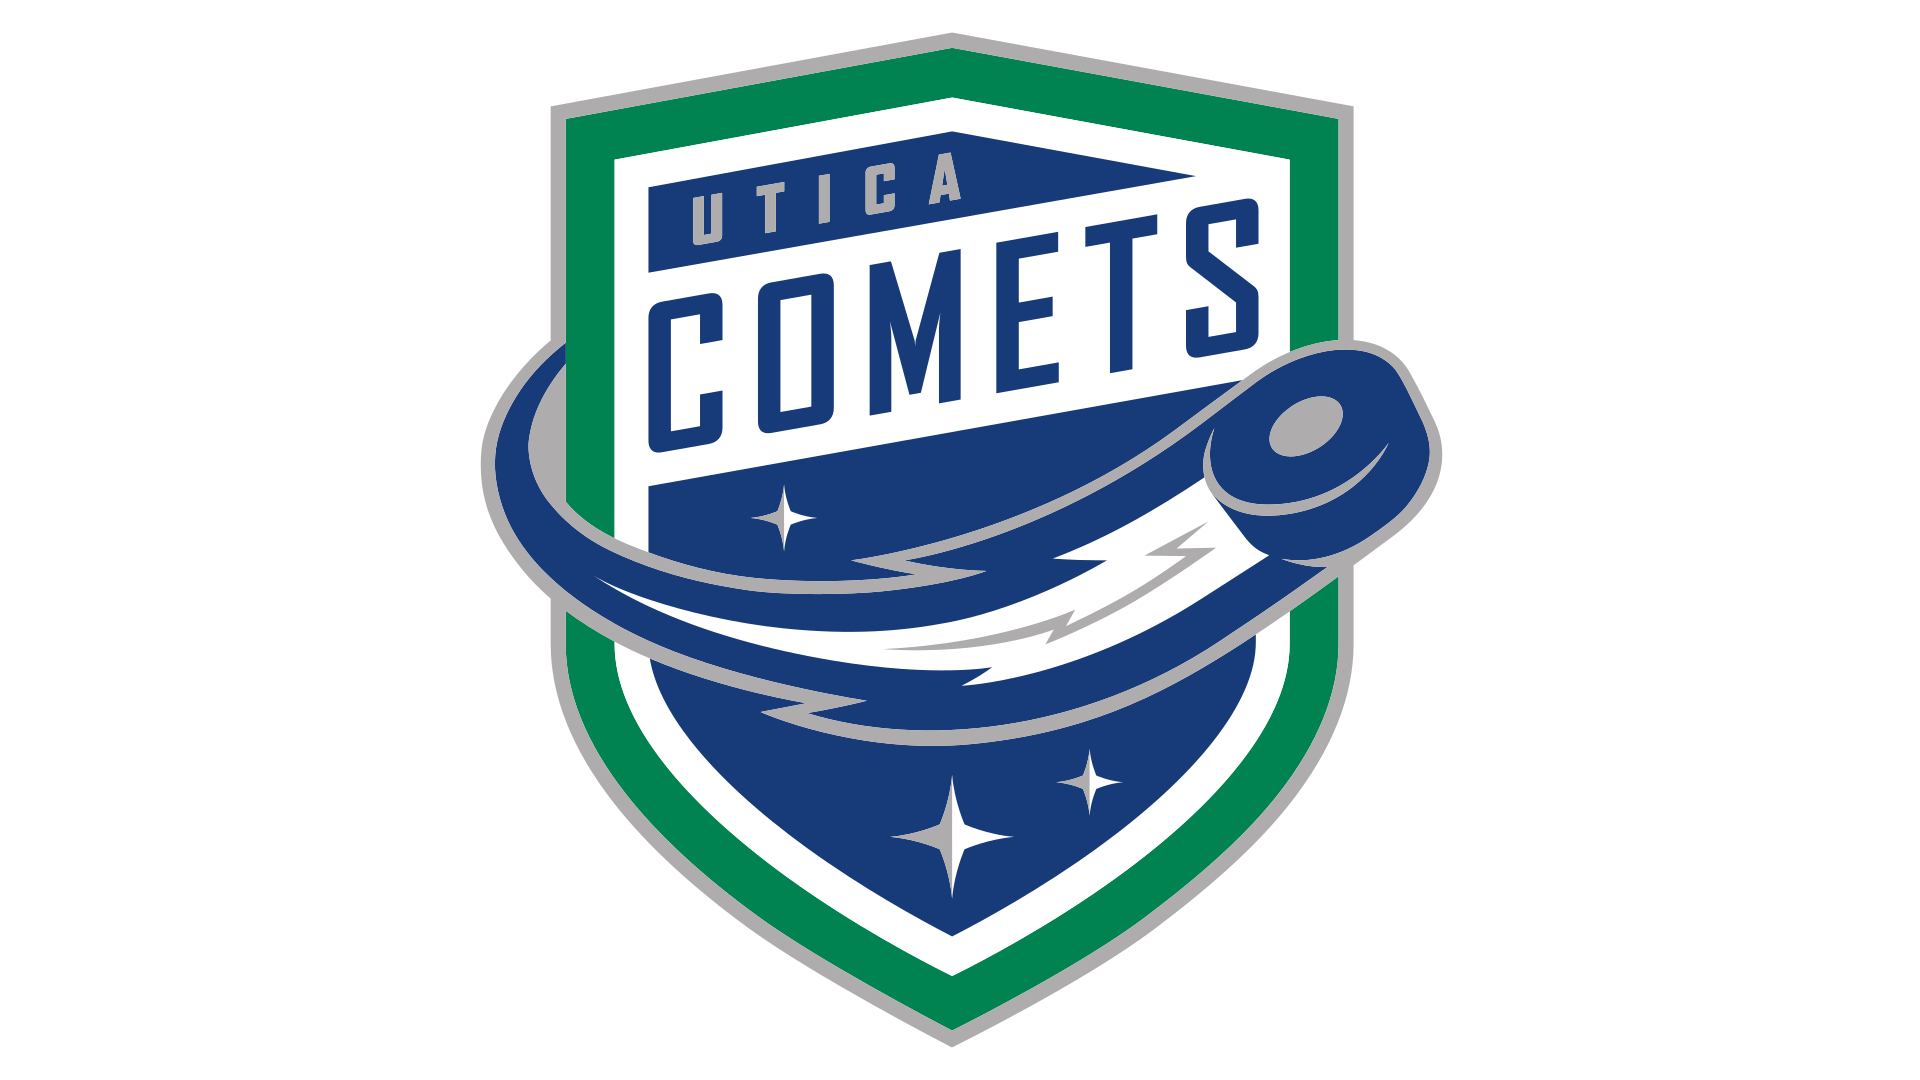 Comets Logo - Utica Comets Logo, Utica Comets Symbol, Meaning, History and Evolution